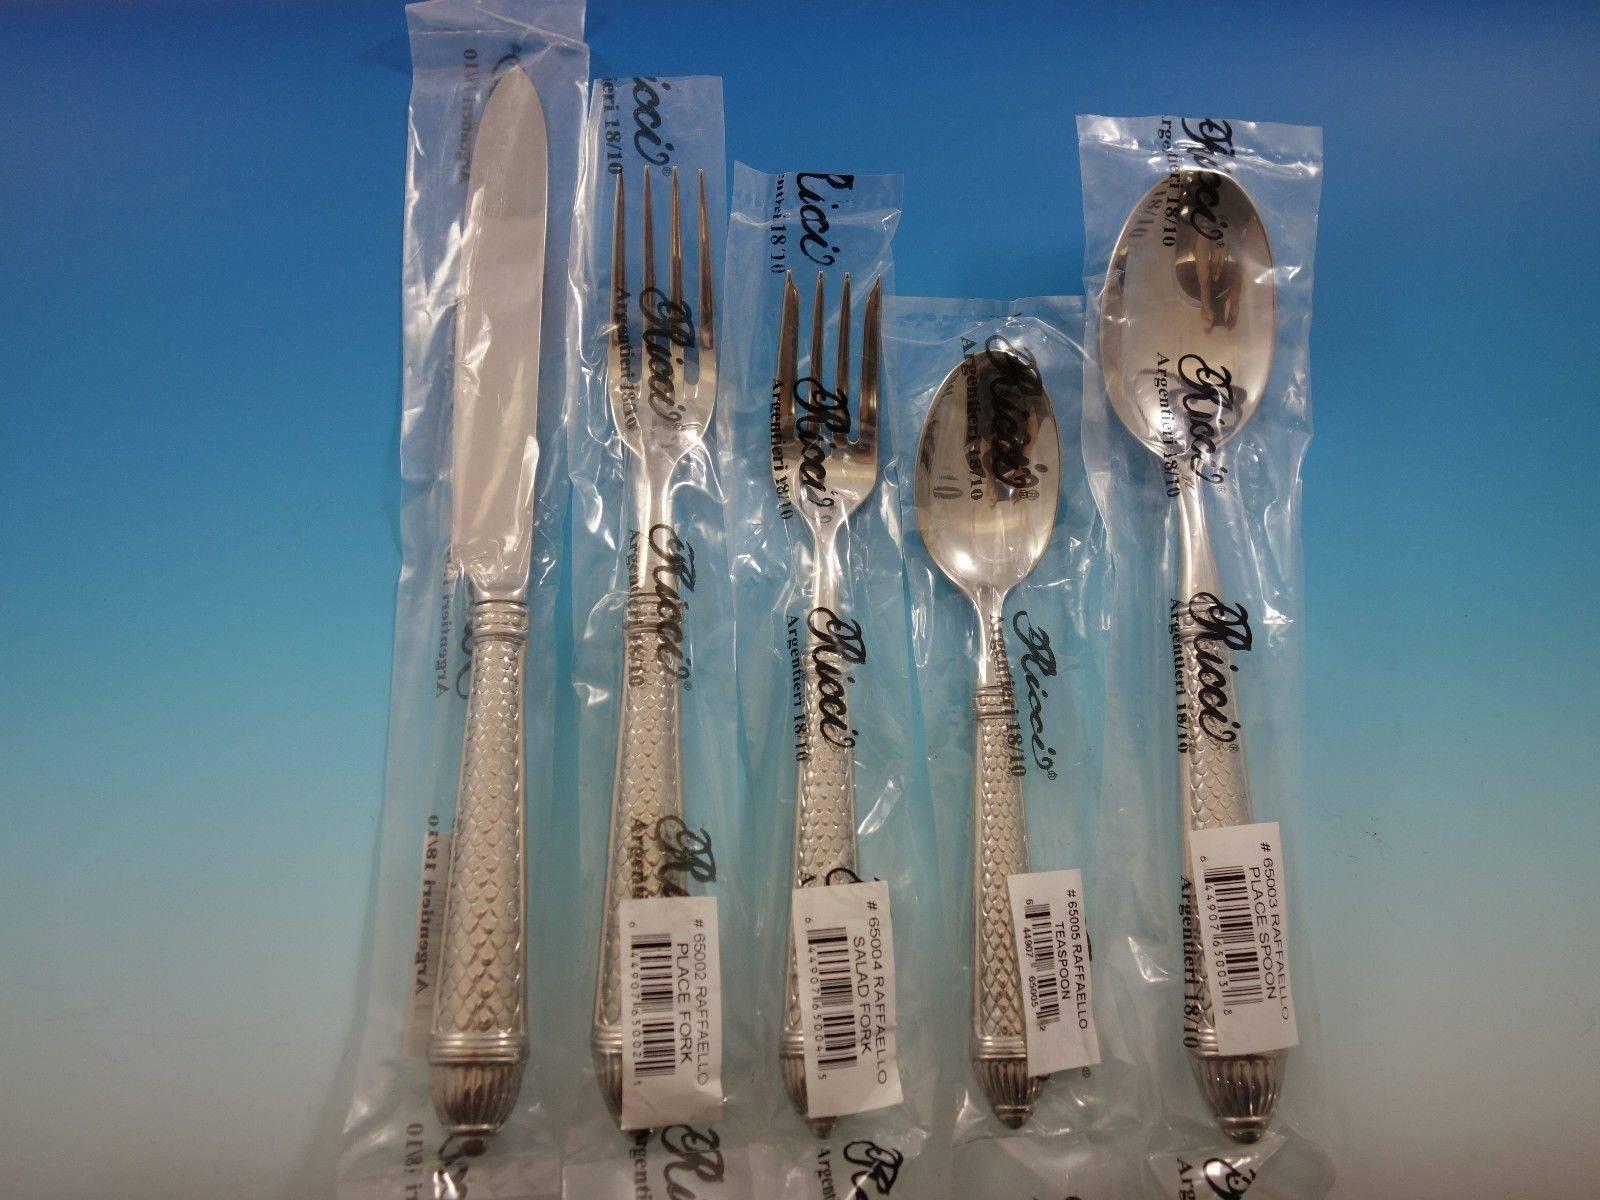 Brand new Raffaello by Ricci stainless steel flatware set for 12, 65 pieces. Highest quality stainless for everyday dining elegance! This set includes:

12 dinner knives, 9 7/8